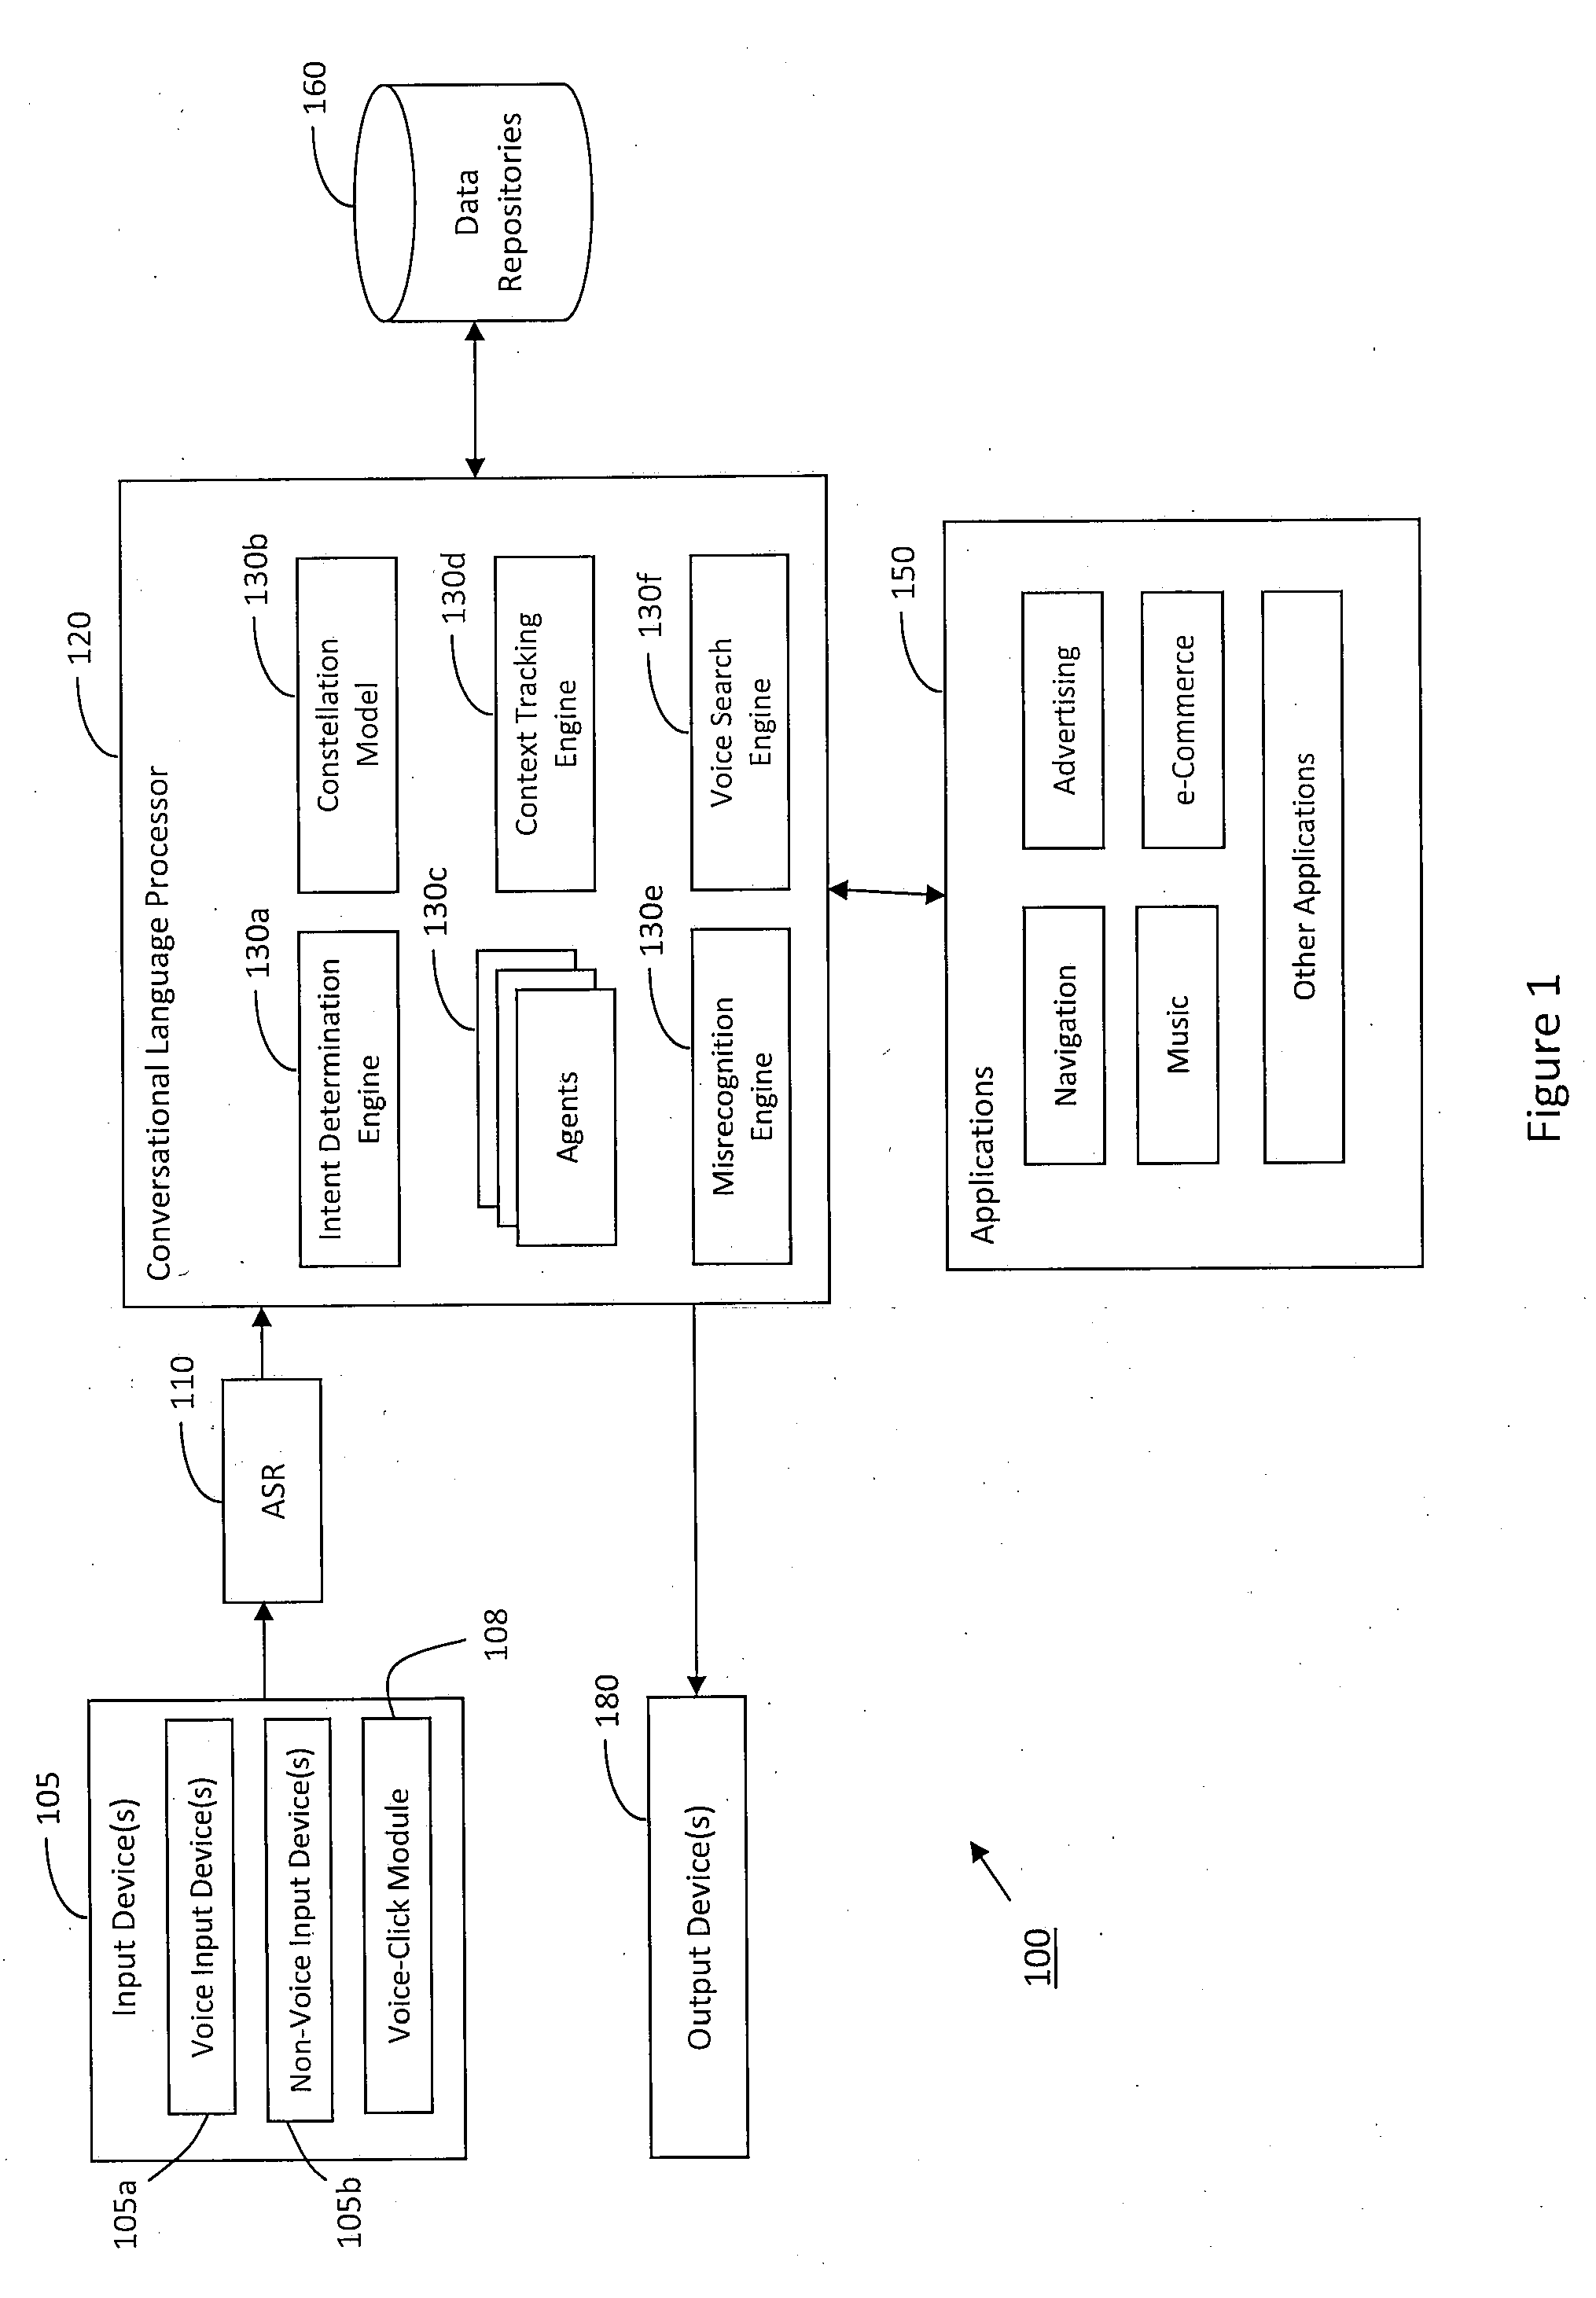 System and method for processing multi-modal device interactions in a natural language voice services environment